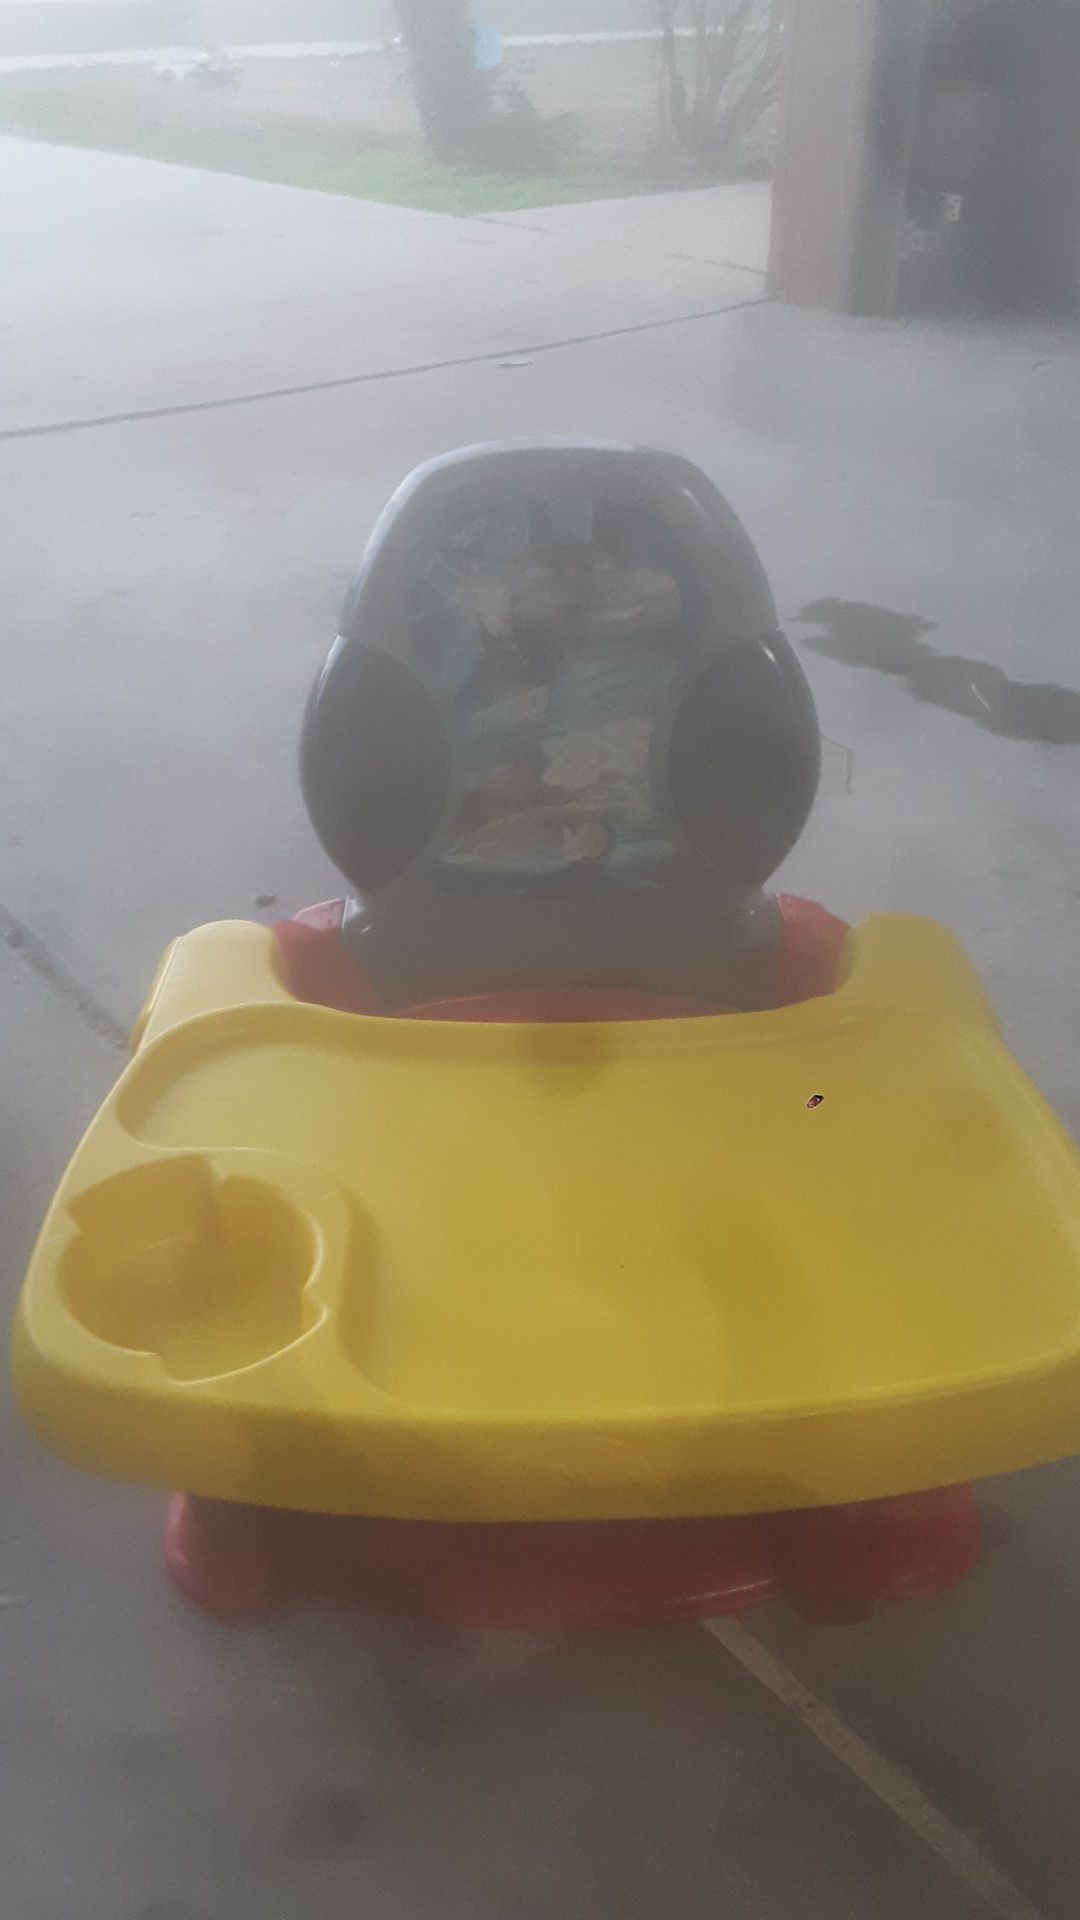 Cars booster seat.